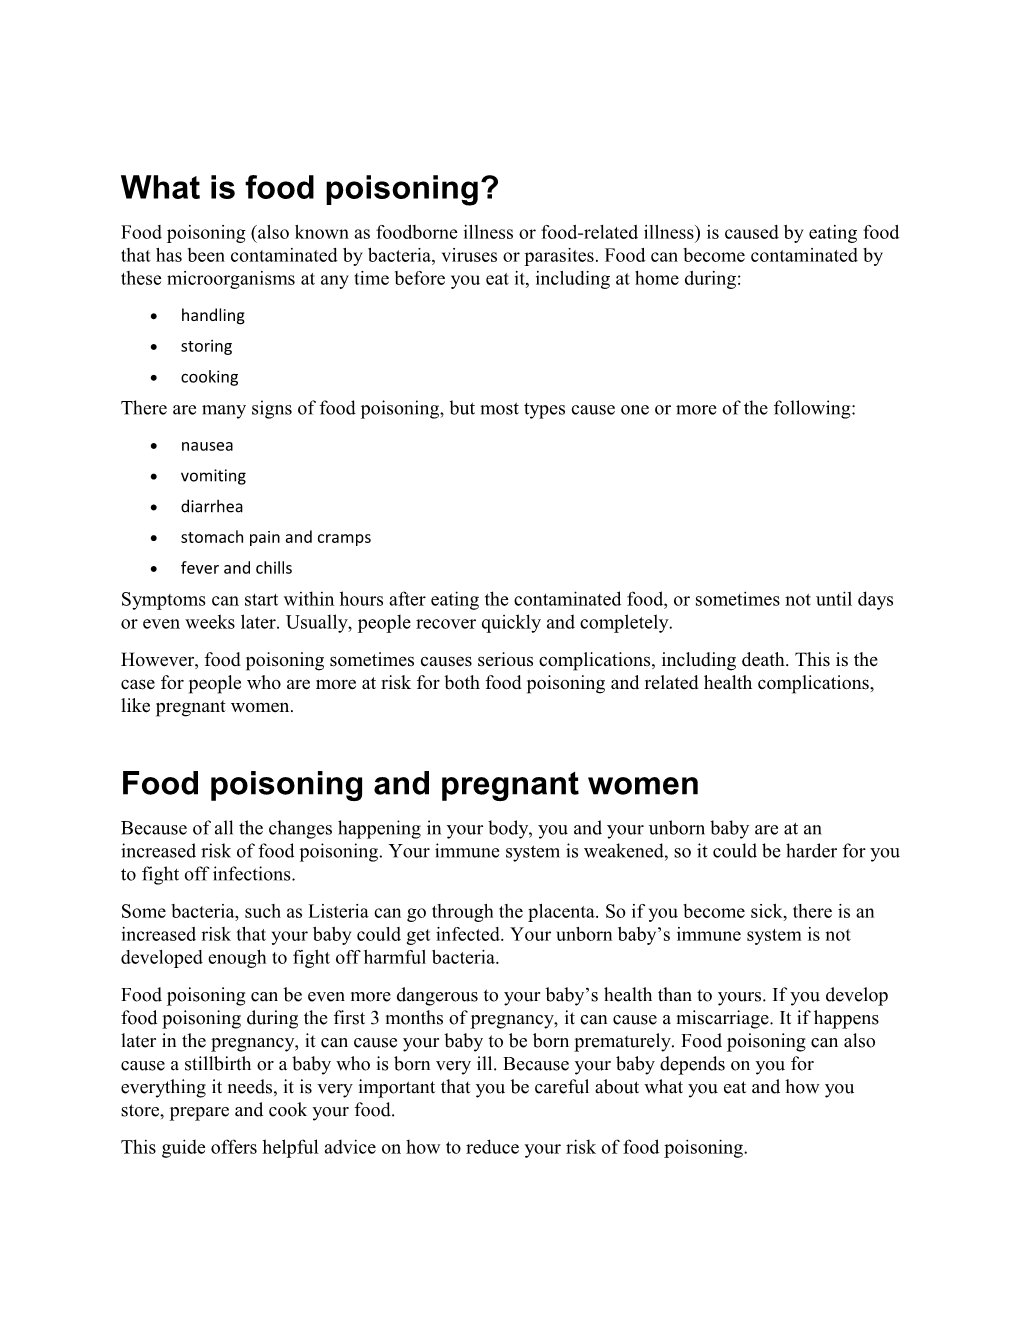 What Is Food Poisoning?